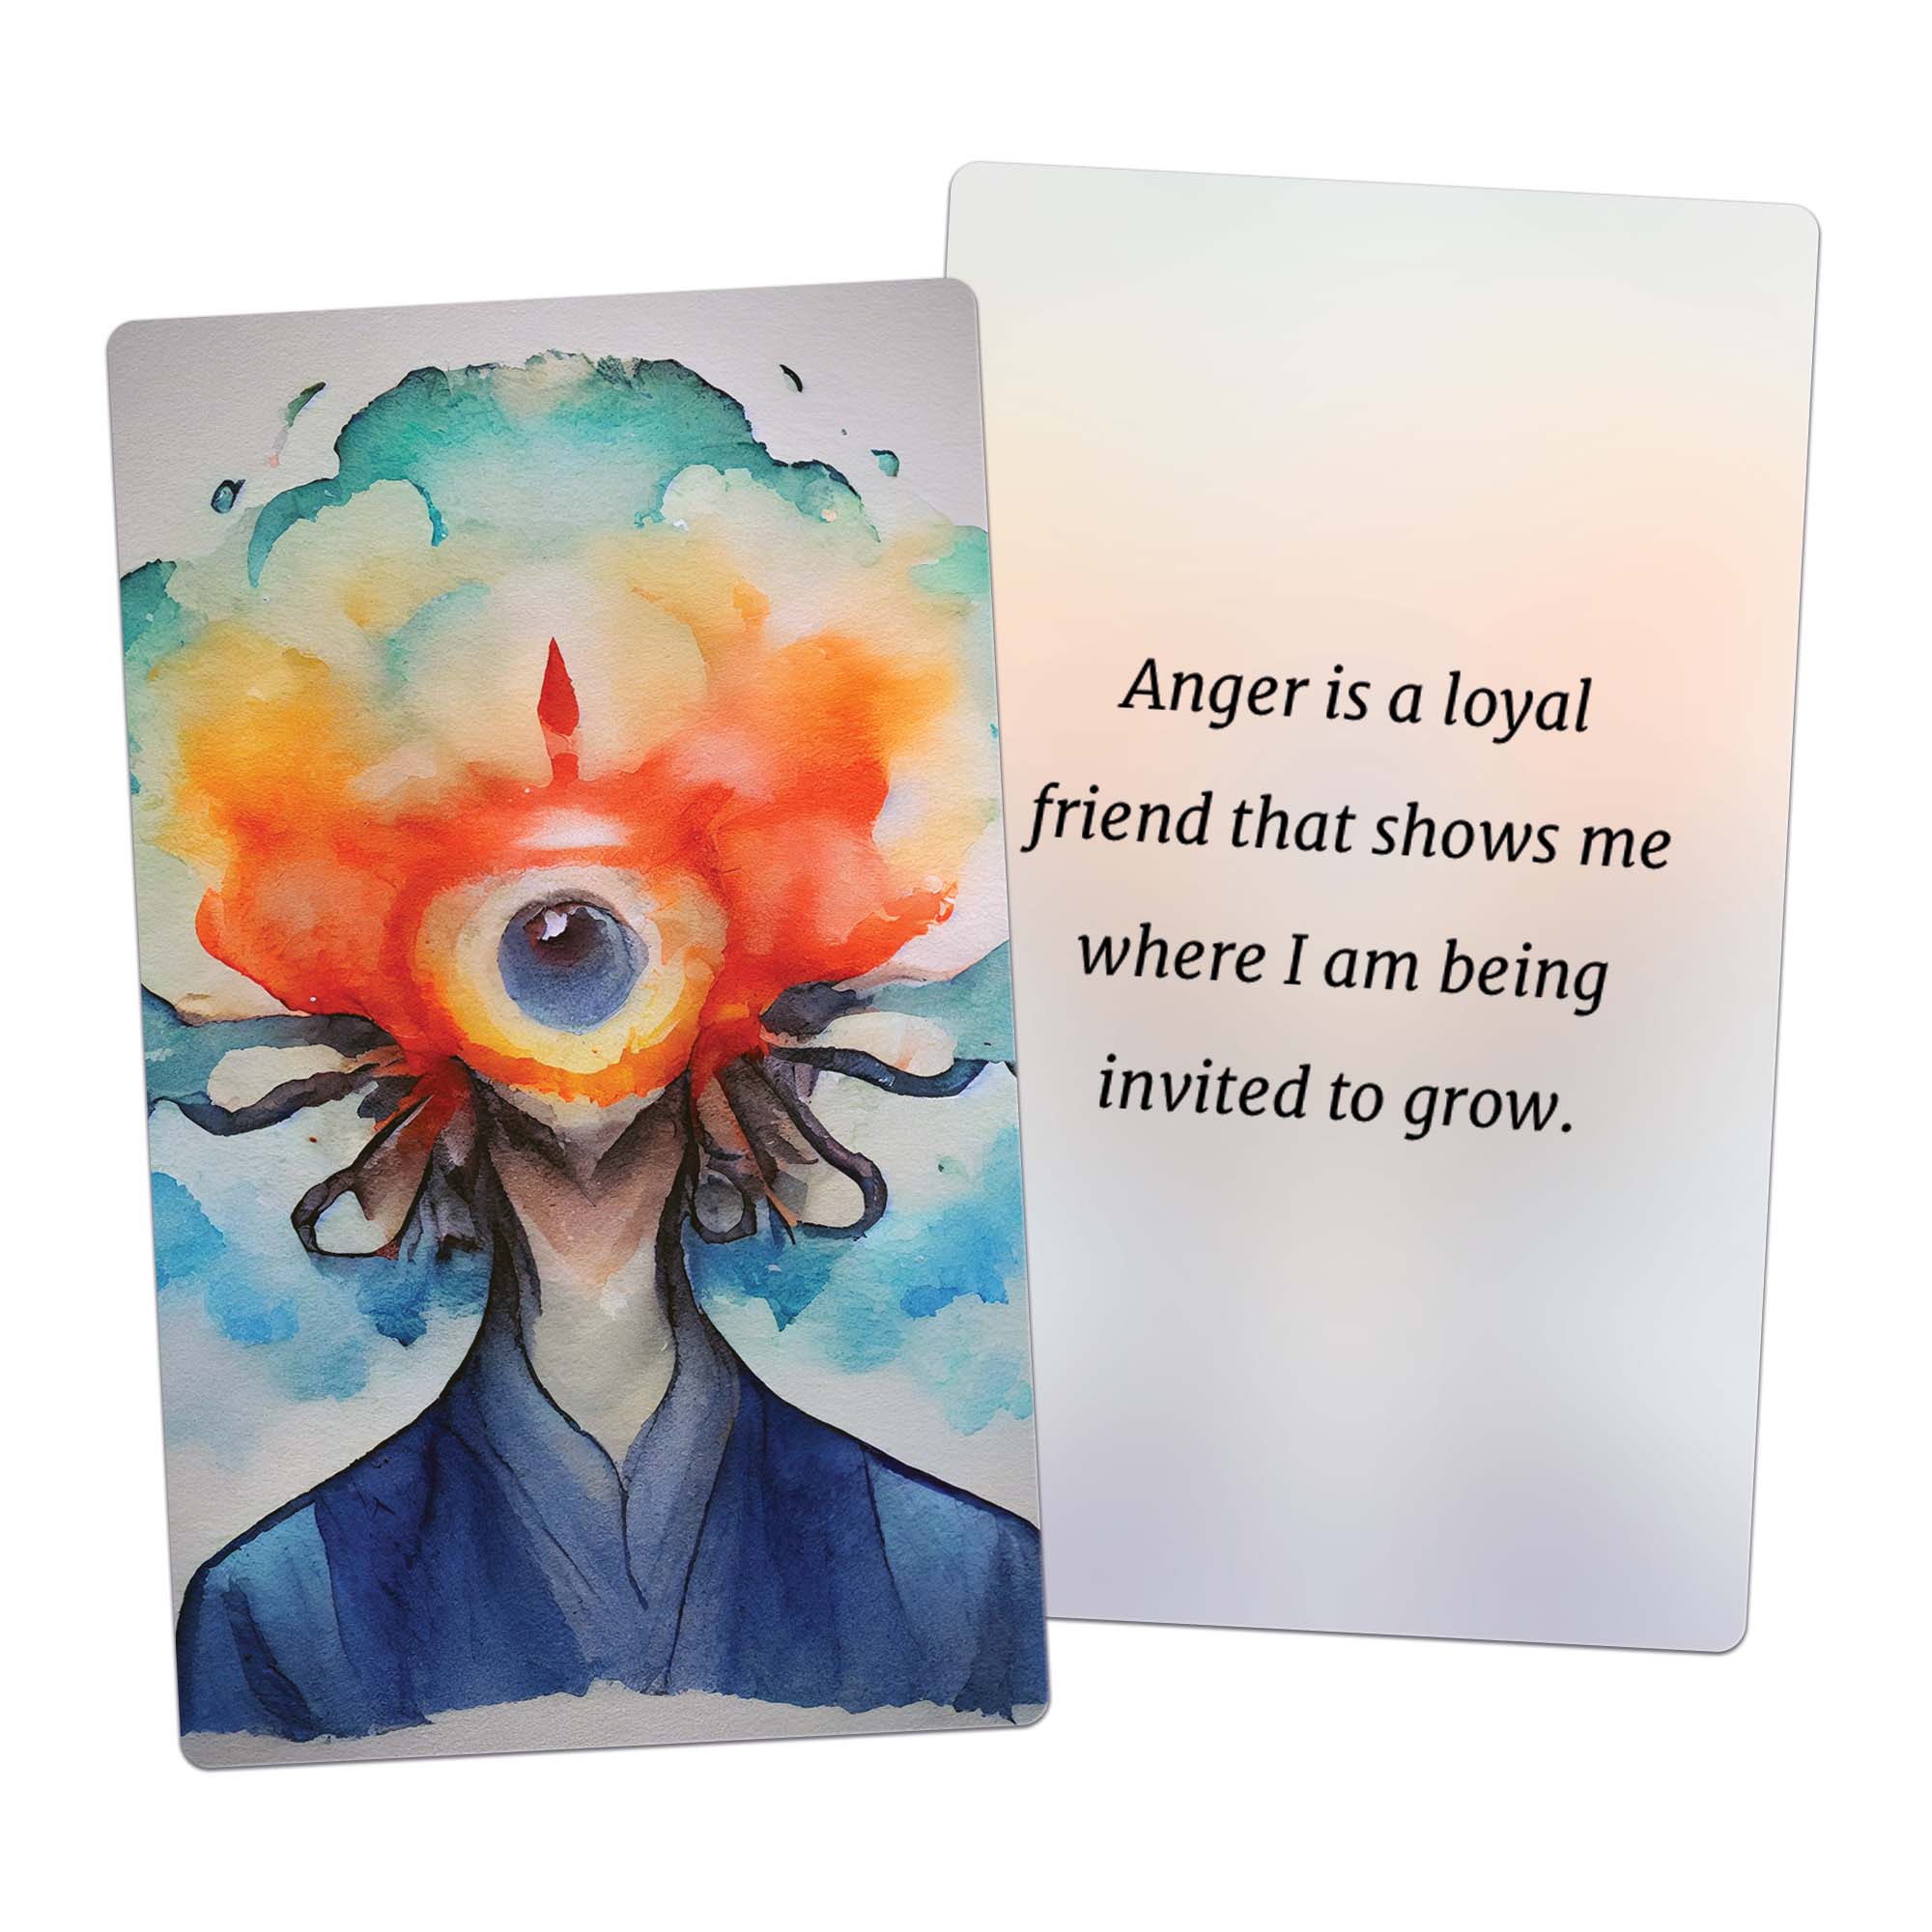 Anger is a loyal friend that shows me where I am being invited to grow.